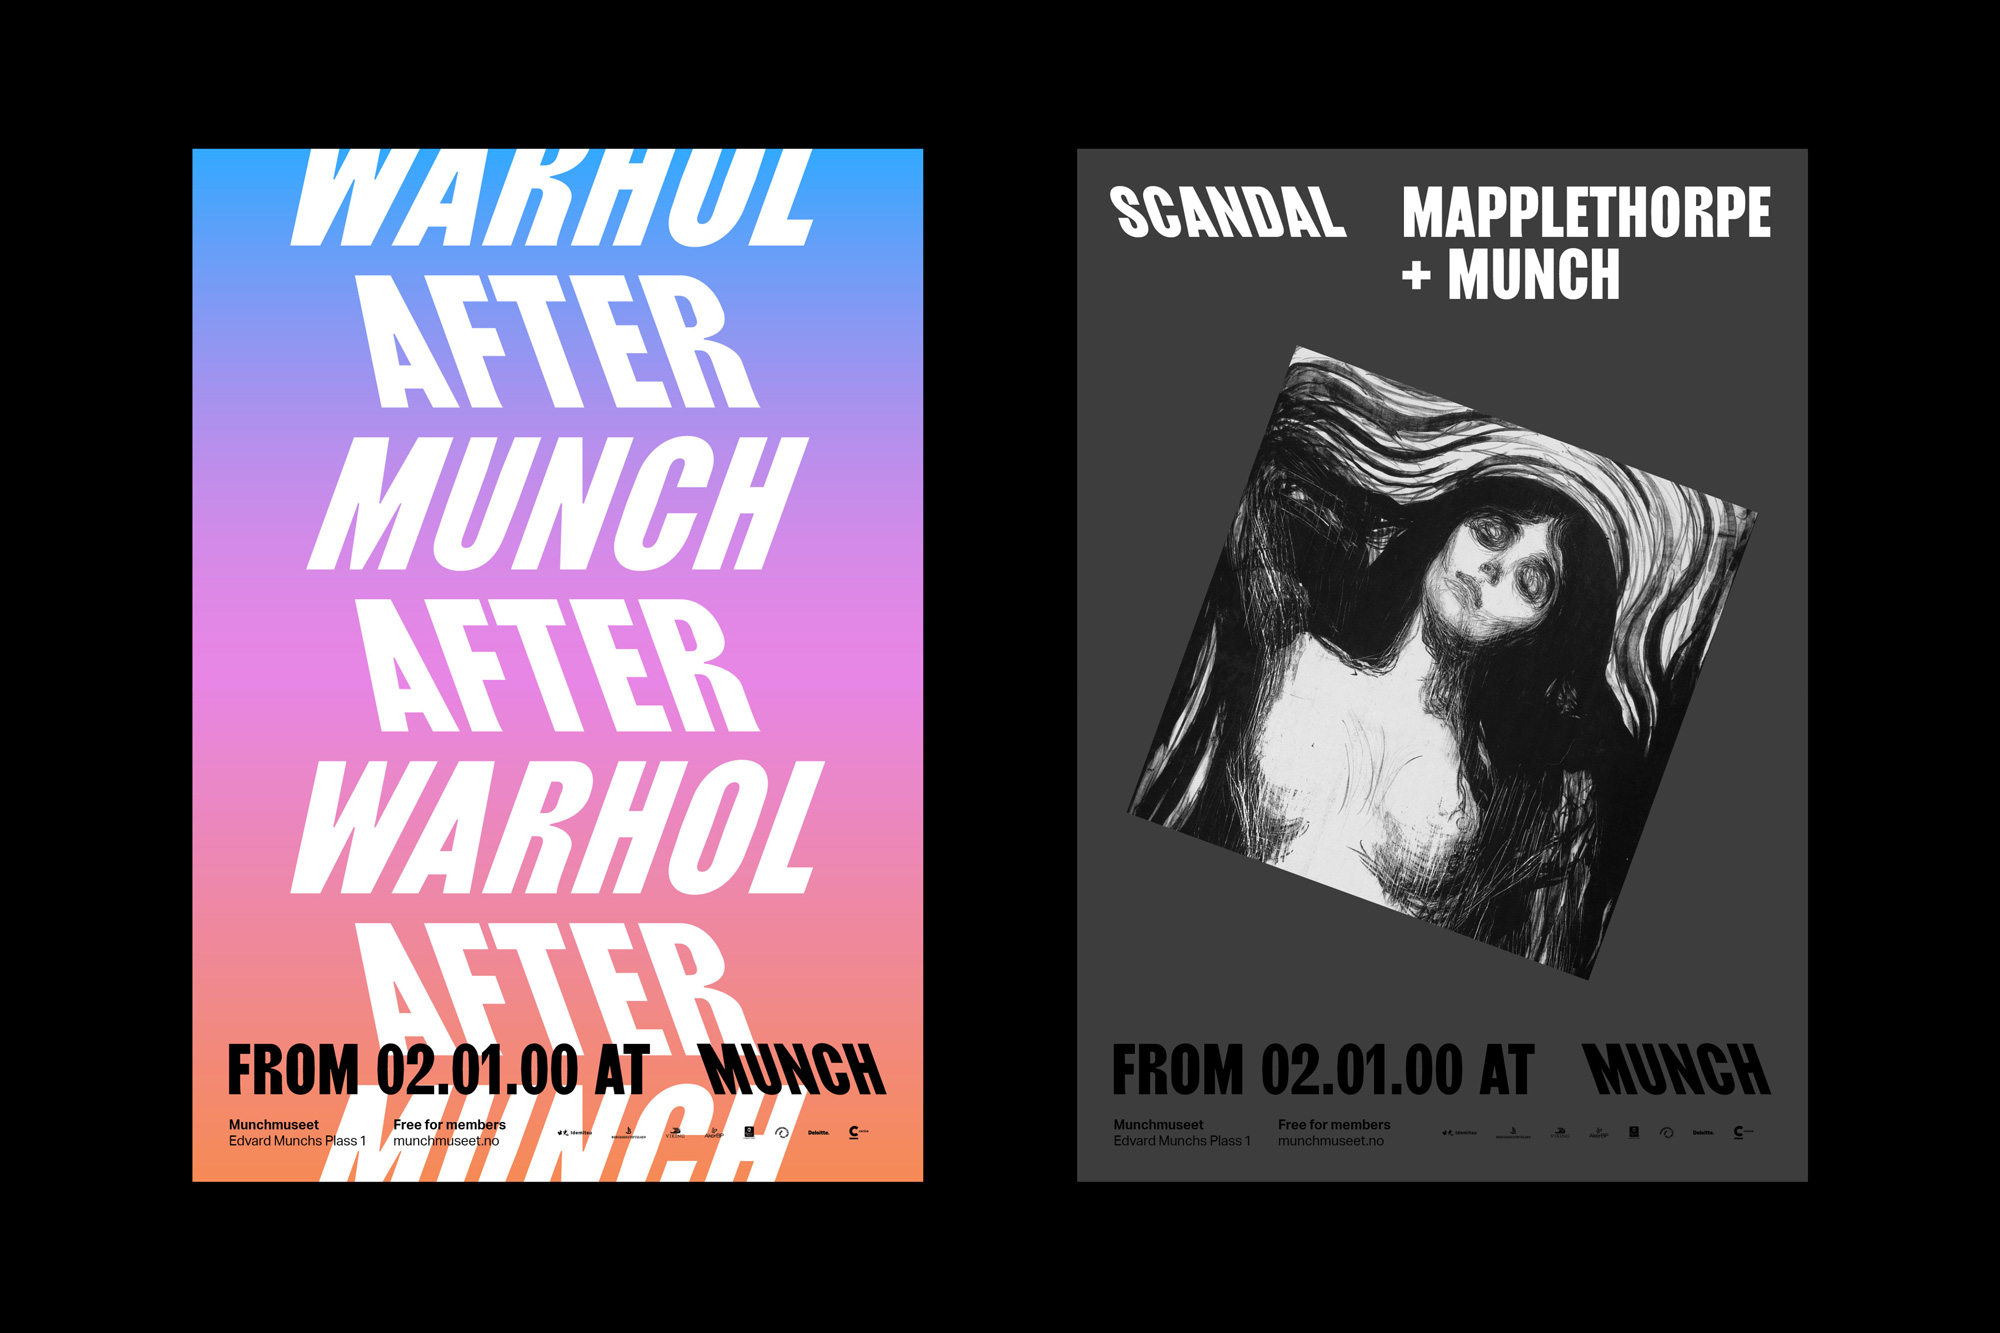 New Logo and Identity for MUNCH by North